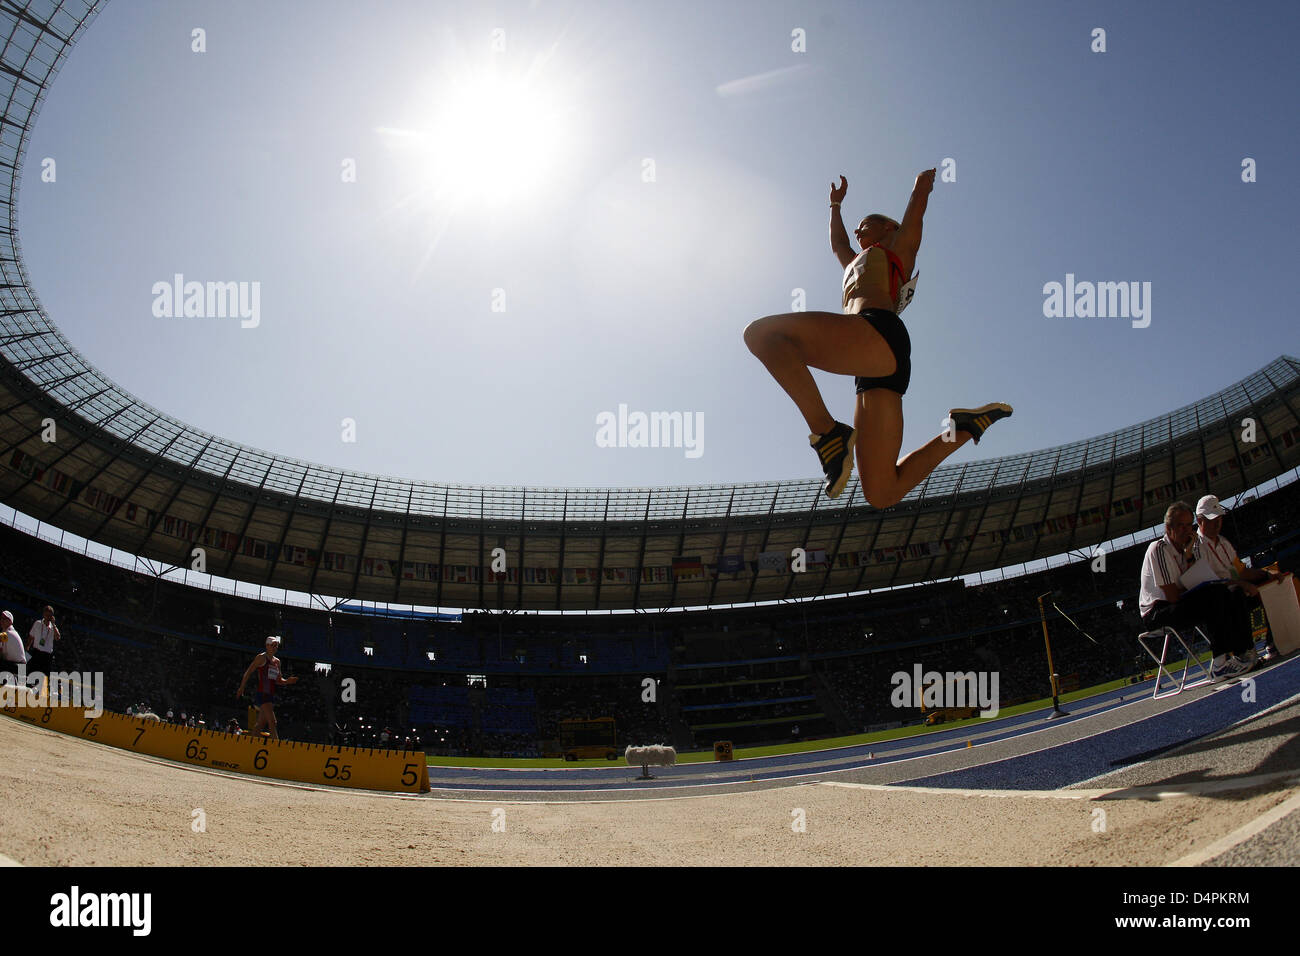 German Jennifer Oeser shown in action during the long jump competition of the heptathlon at the 12th IAAF World Championships in Athletics in Berlin, Germany, 16 August 2009. Photo: KAY NIETFELD Stock Photo